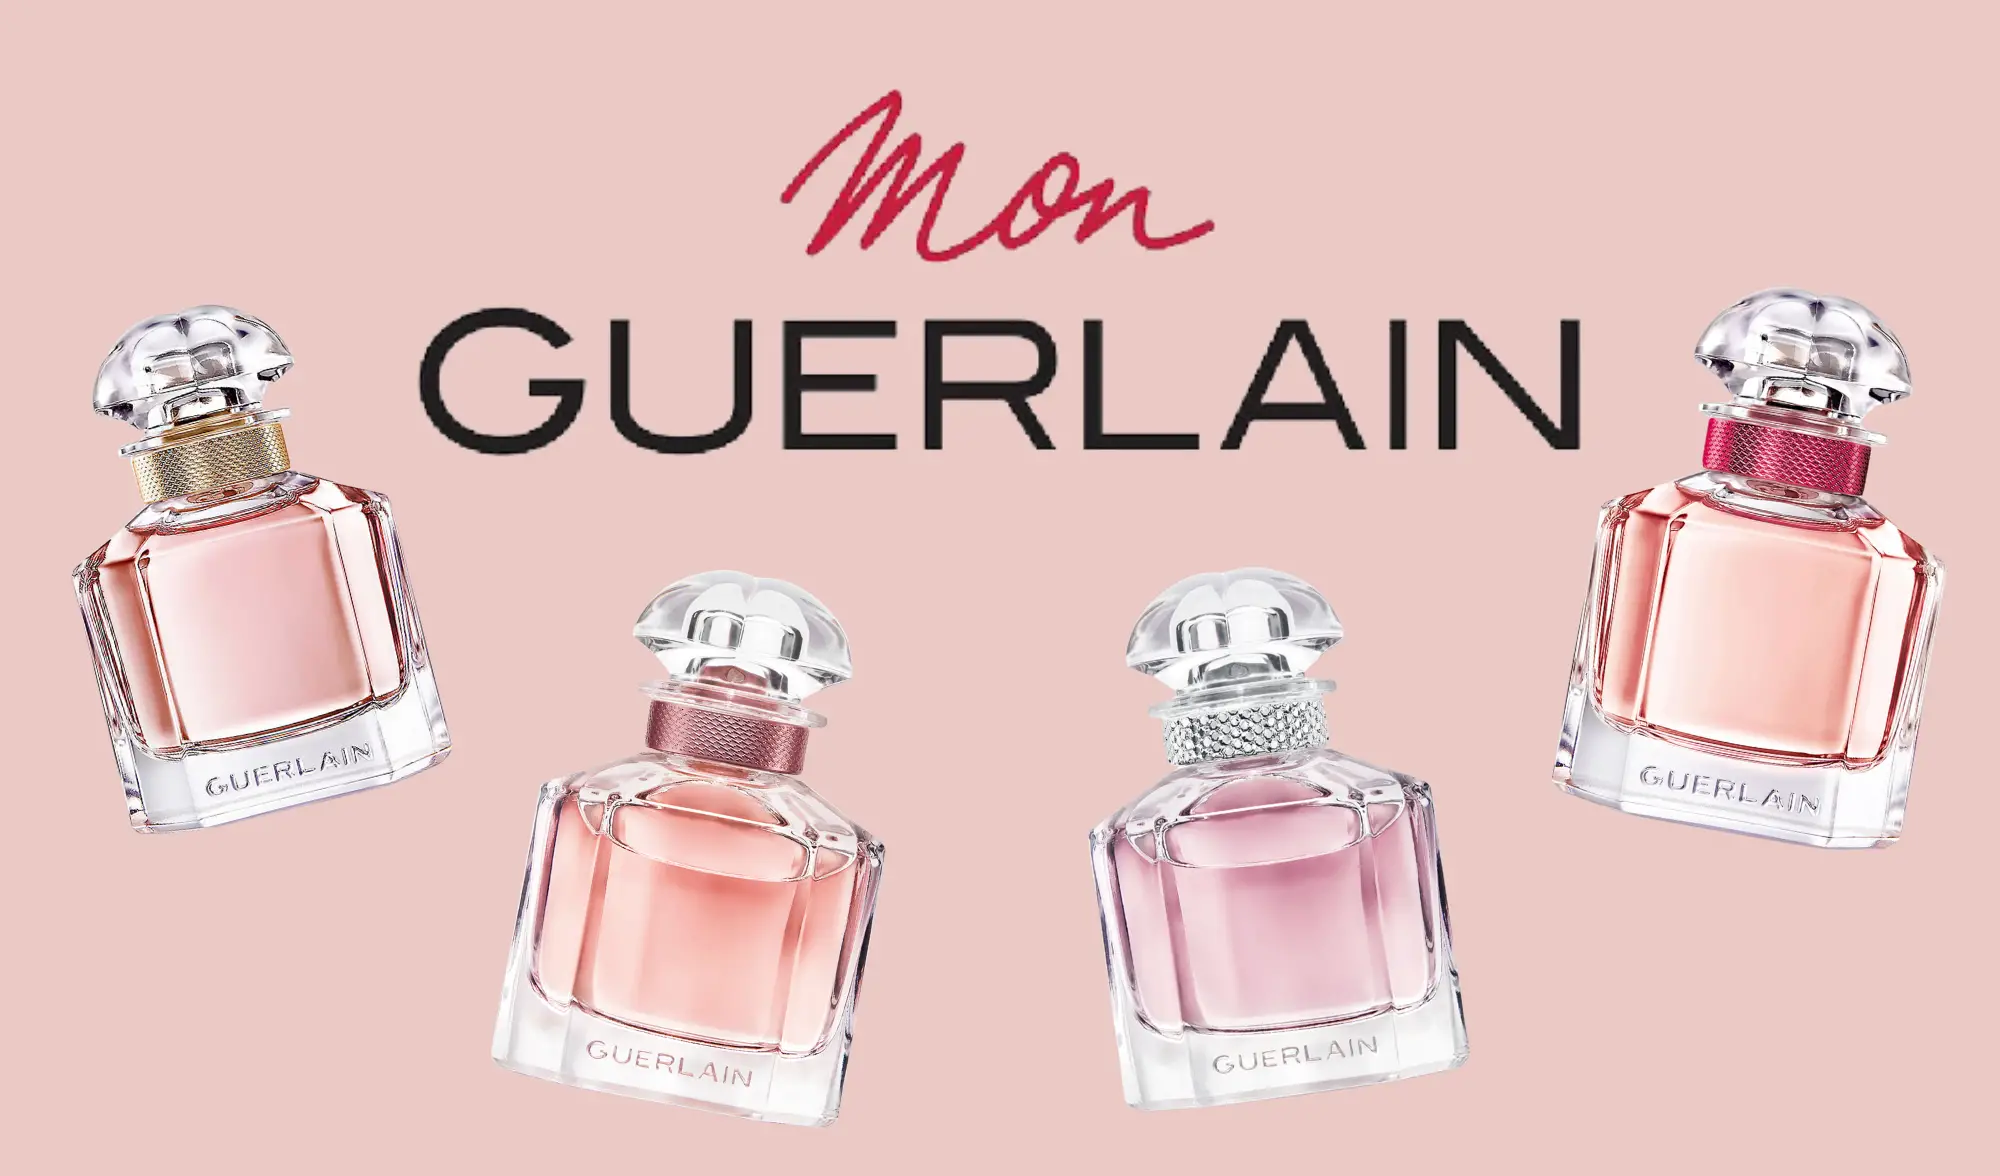 The Ultimate Guide To The YSL Mon Paris Perfume Range